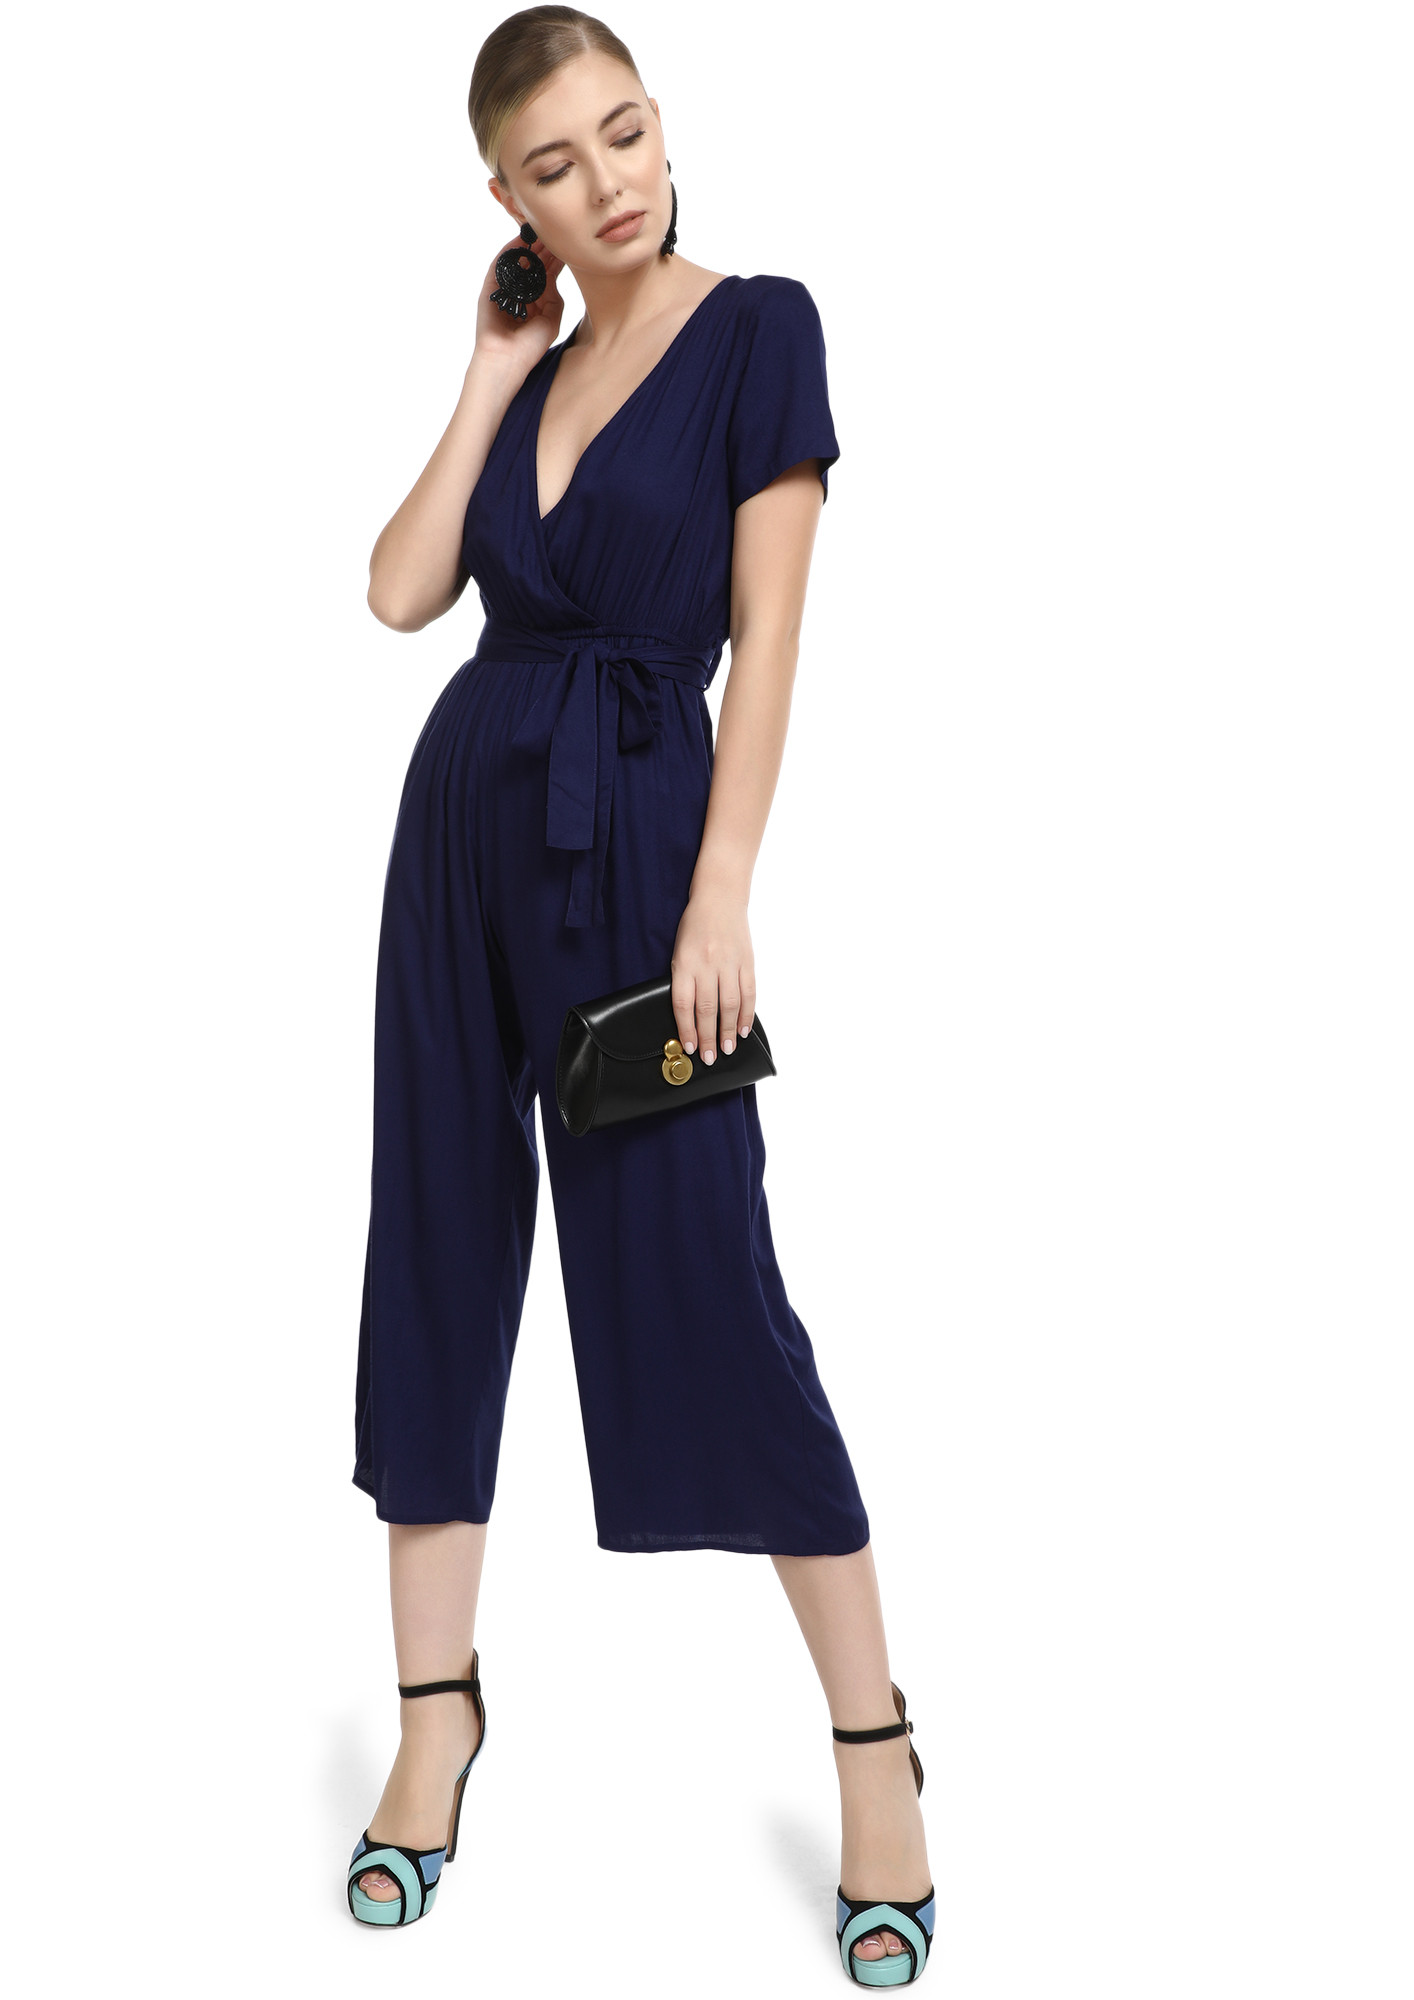 PERFECTLY ALRIGHT NAVY JUMPSUIT